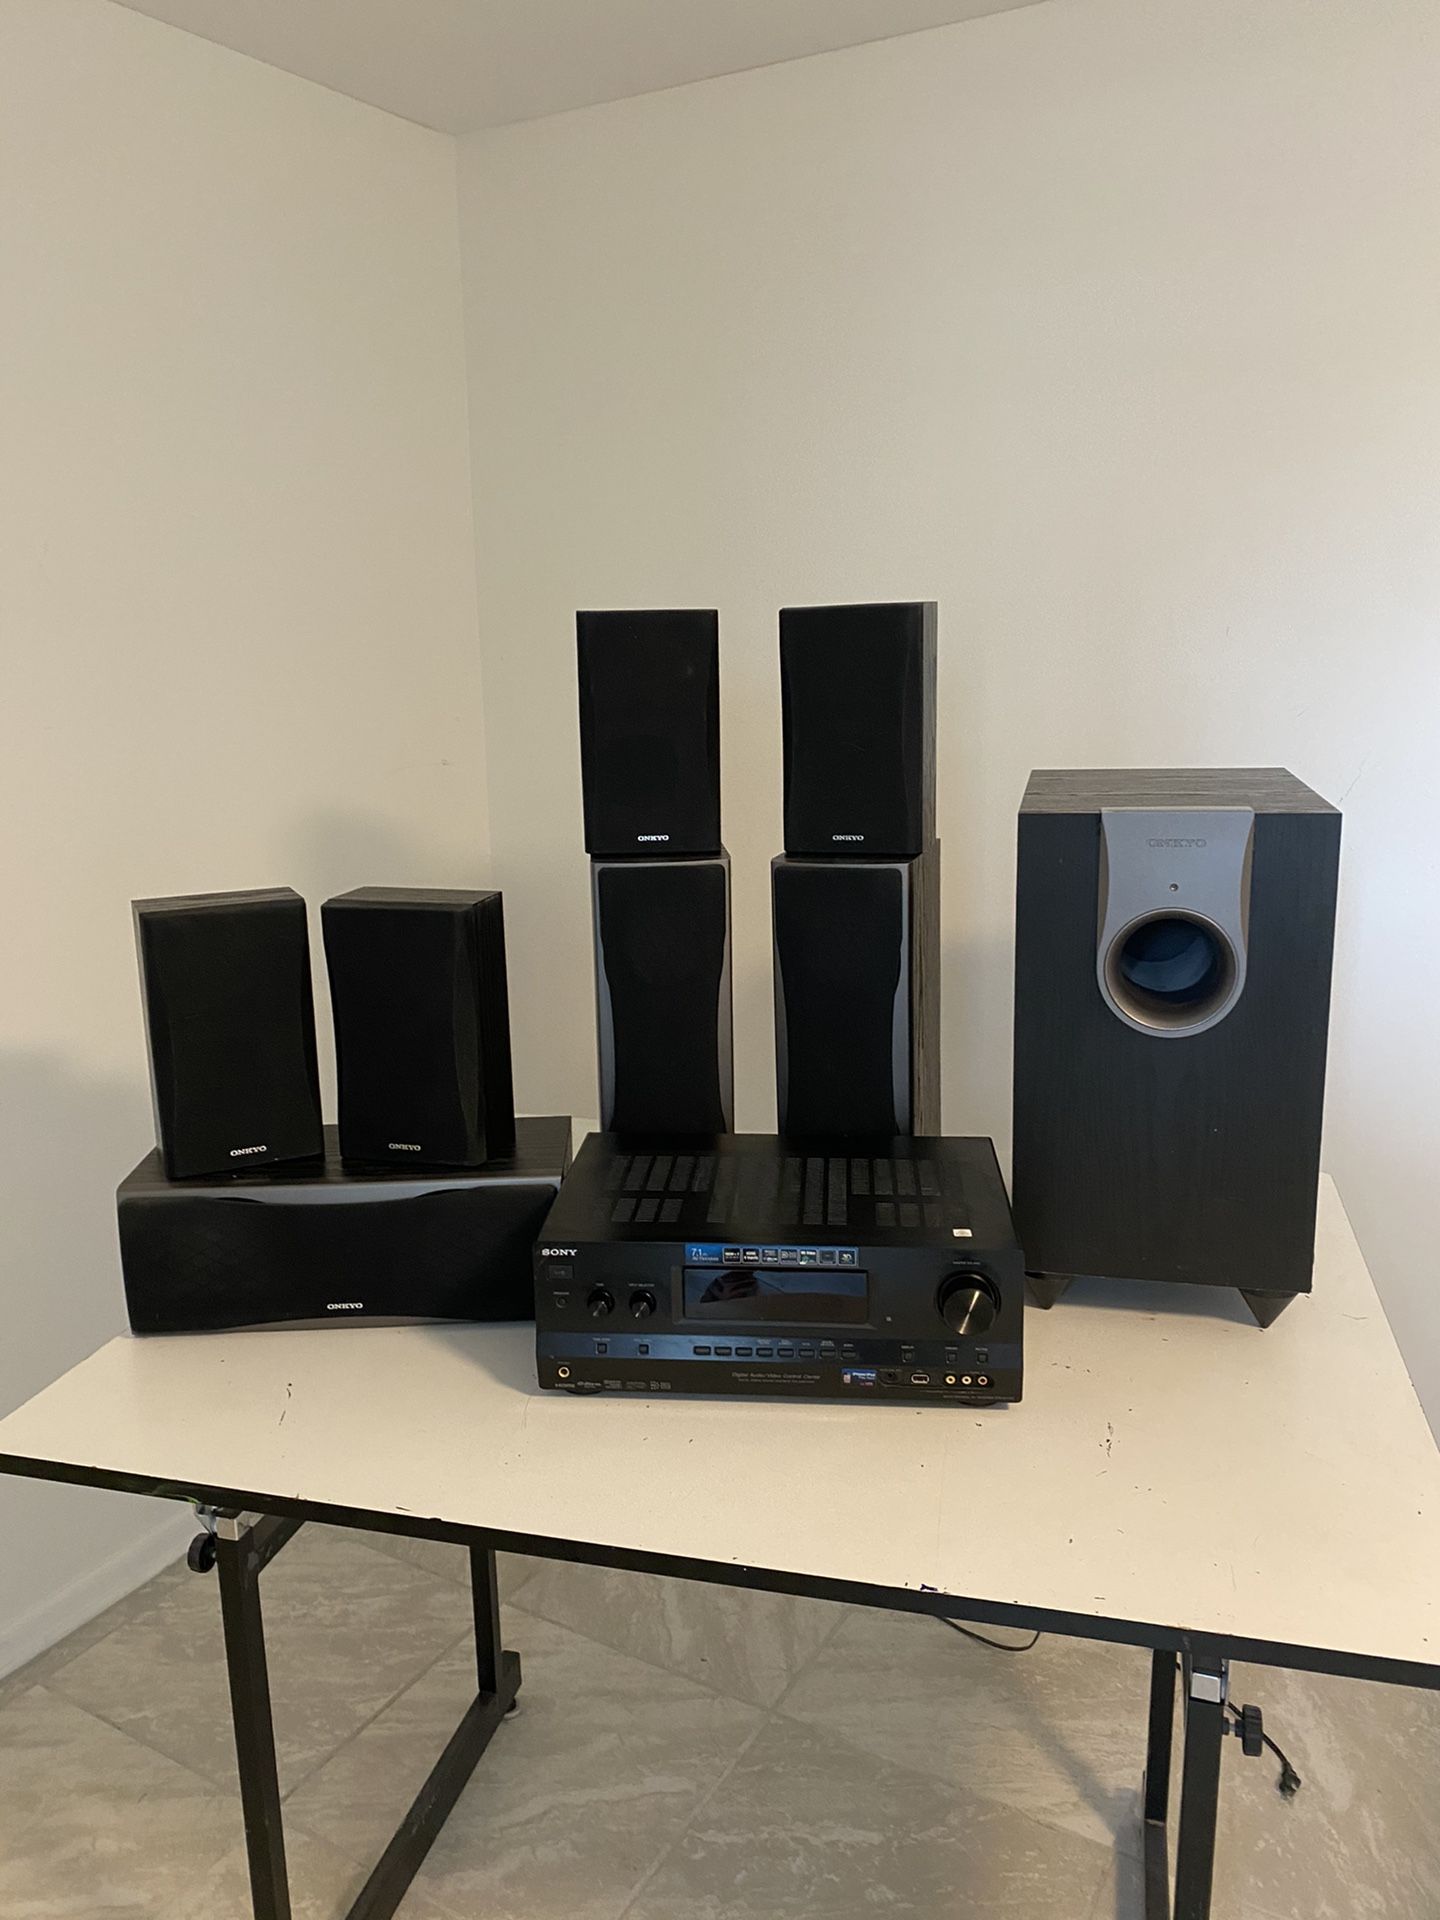 Sony Multichannel Receiver & Onkyo Surround Sound Speakers and Subwoofer